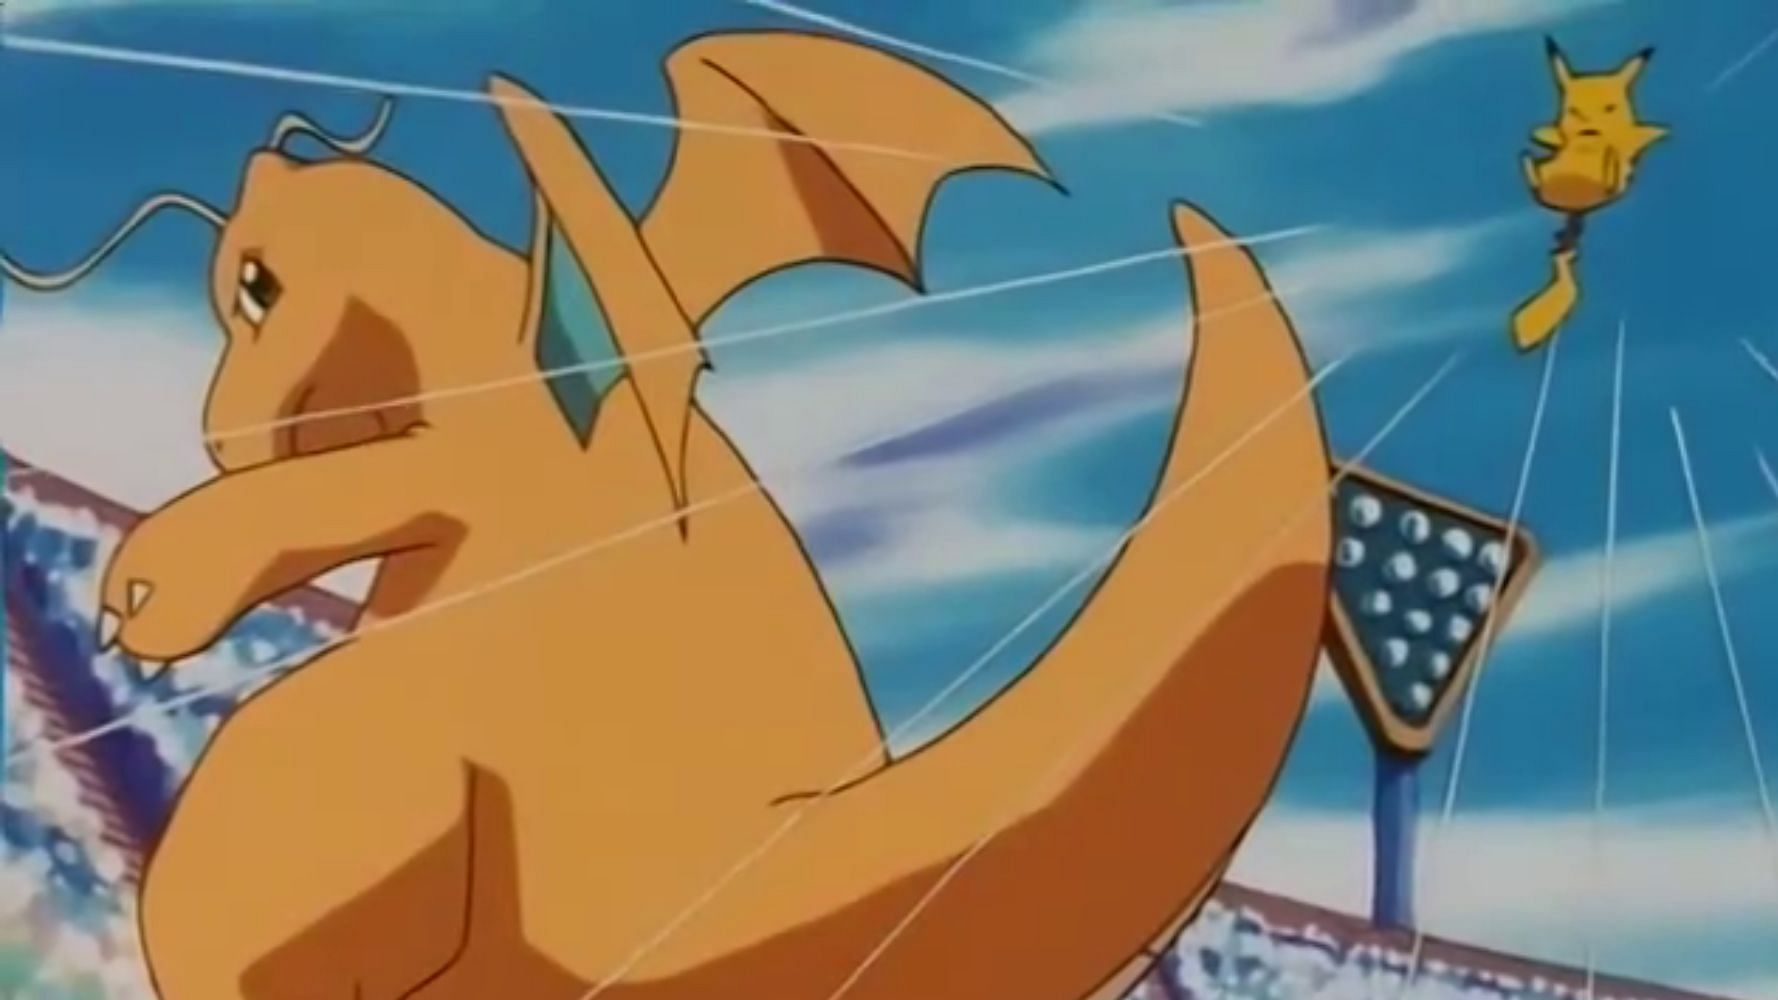 Dragonite was not an easy foe to beat (Image via OLM, Inc)